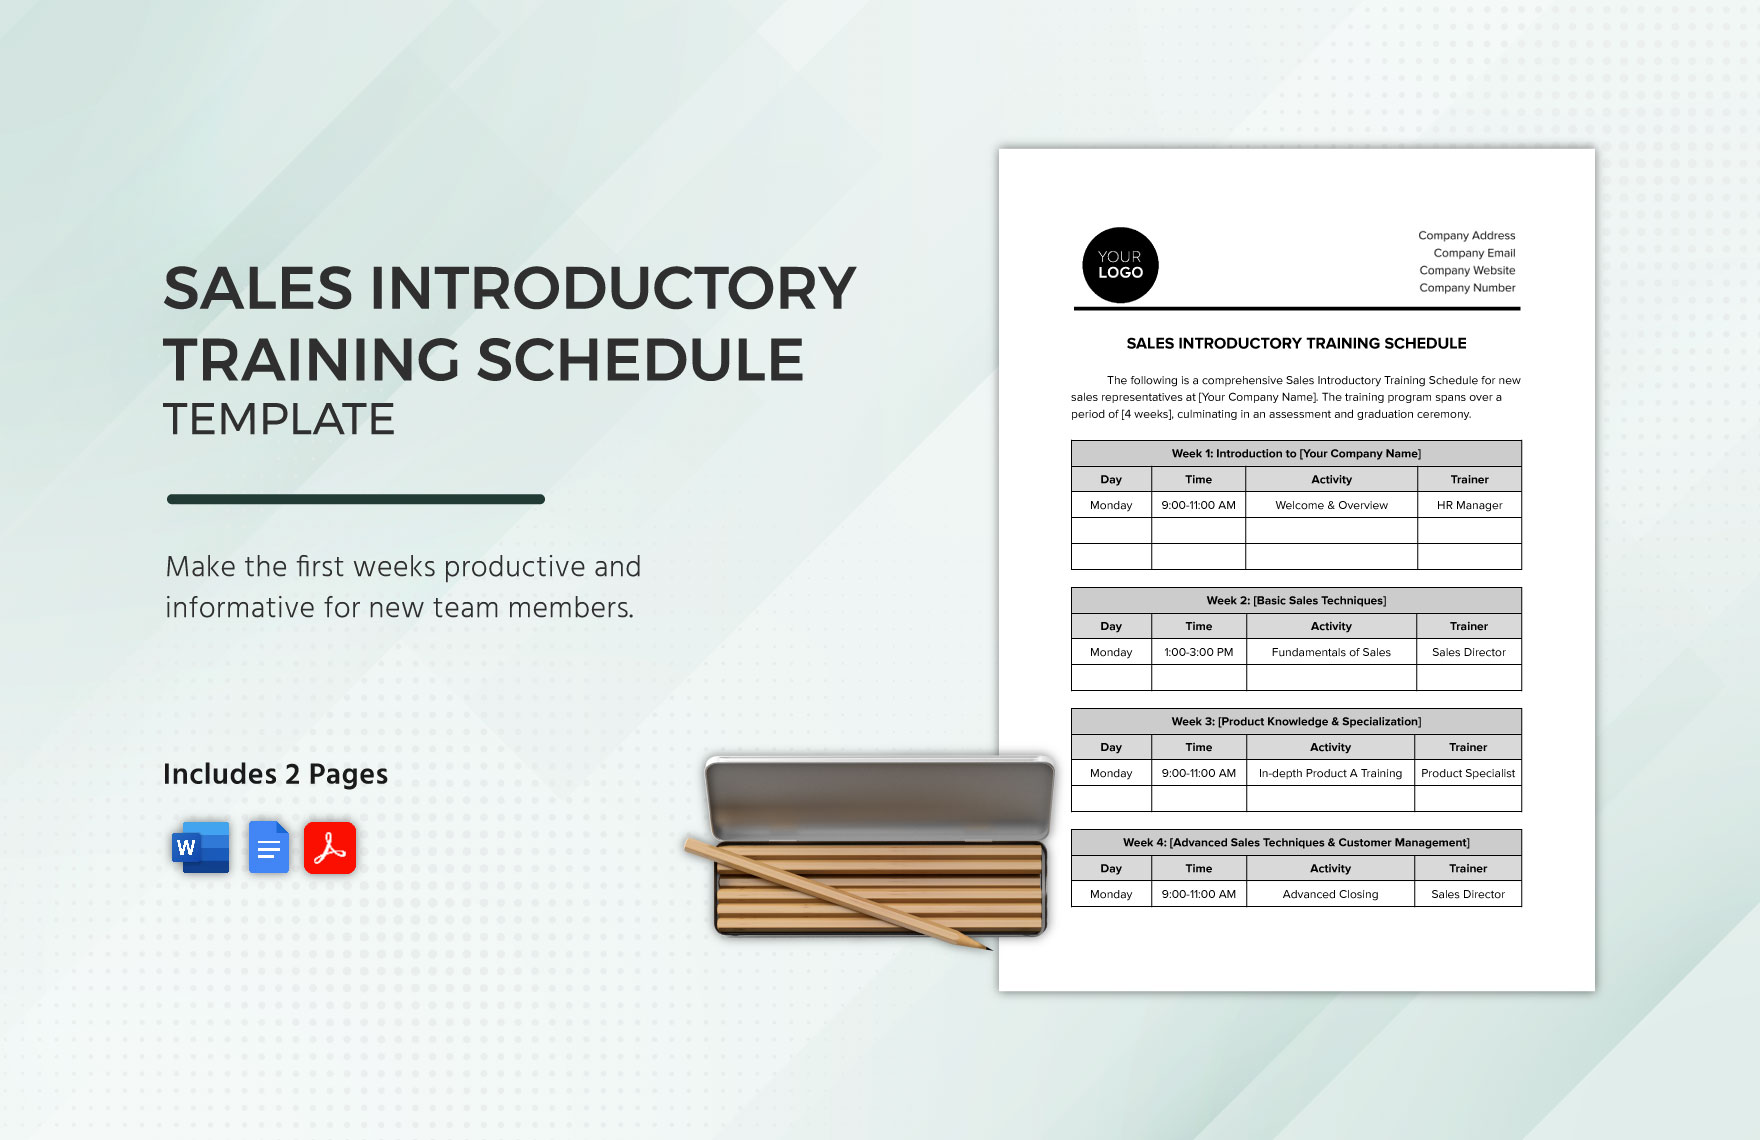 Sales Introductory Training Schedule Template in Word, Google Docs, PDF